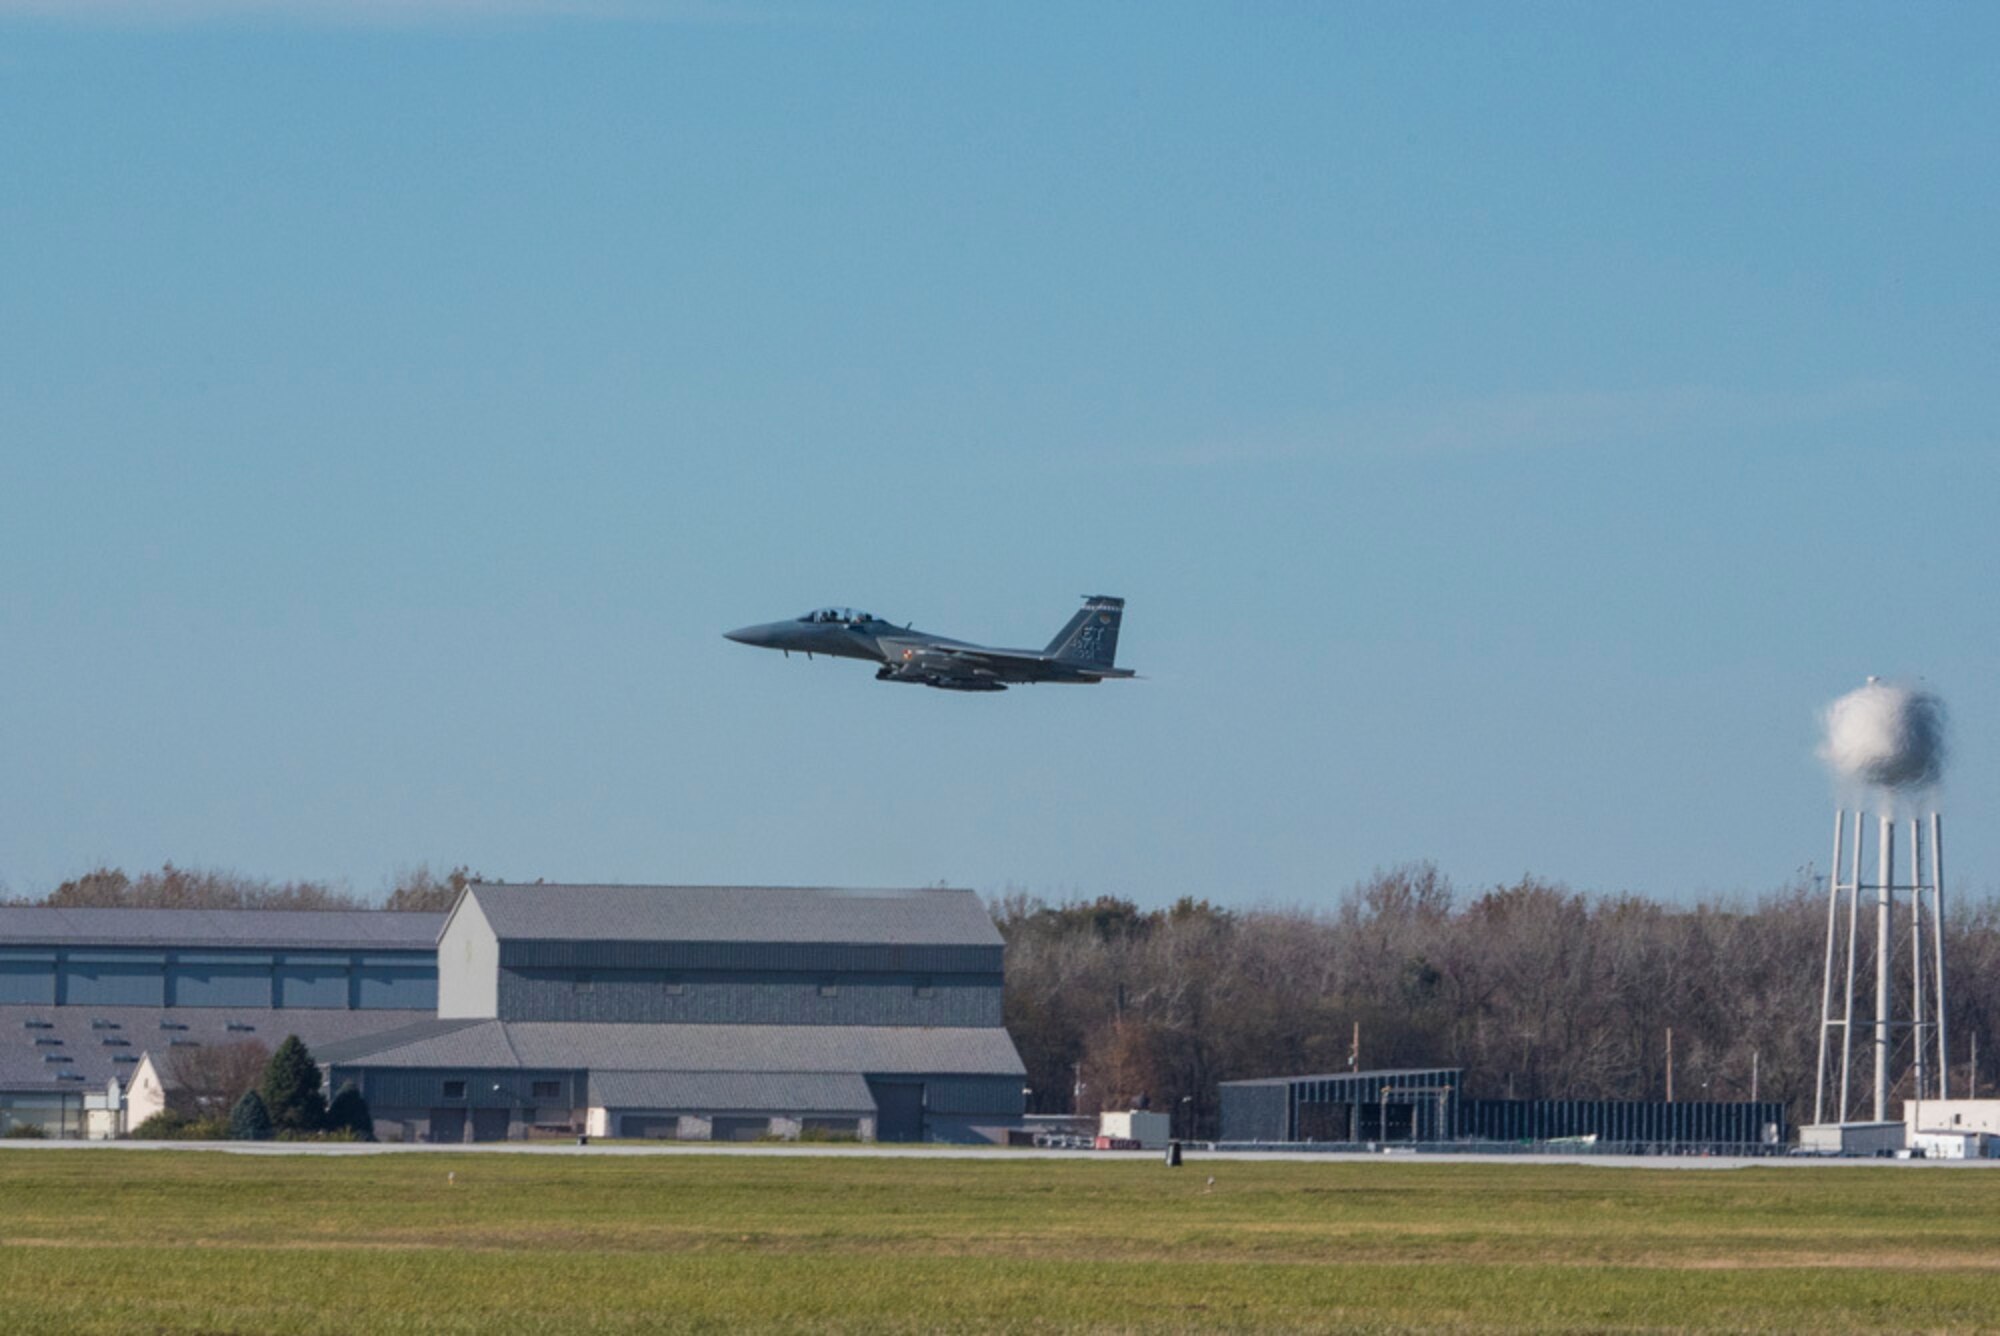 An F-15EX fighter jet flies by Wright-Patterson Air Force Base, Ohio, Nov. 8, 2021. The pilots visited Wright-Patt to give the Air Force Life Cycle Management Center’s F-15EX Program team the opportunity to see the aircraft up close.(U.S. Air Force photo by Jaima Fogg)